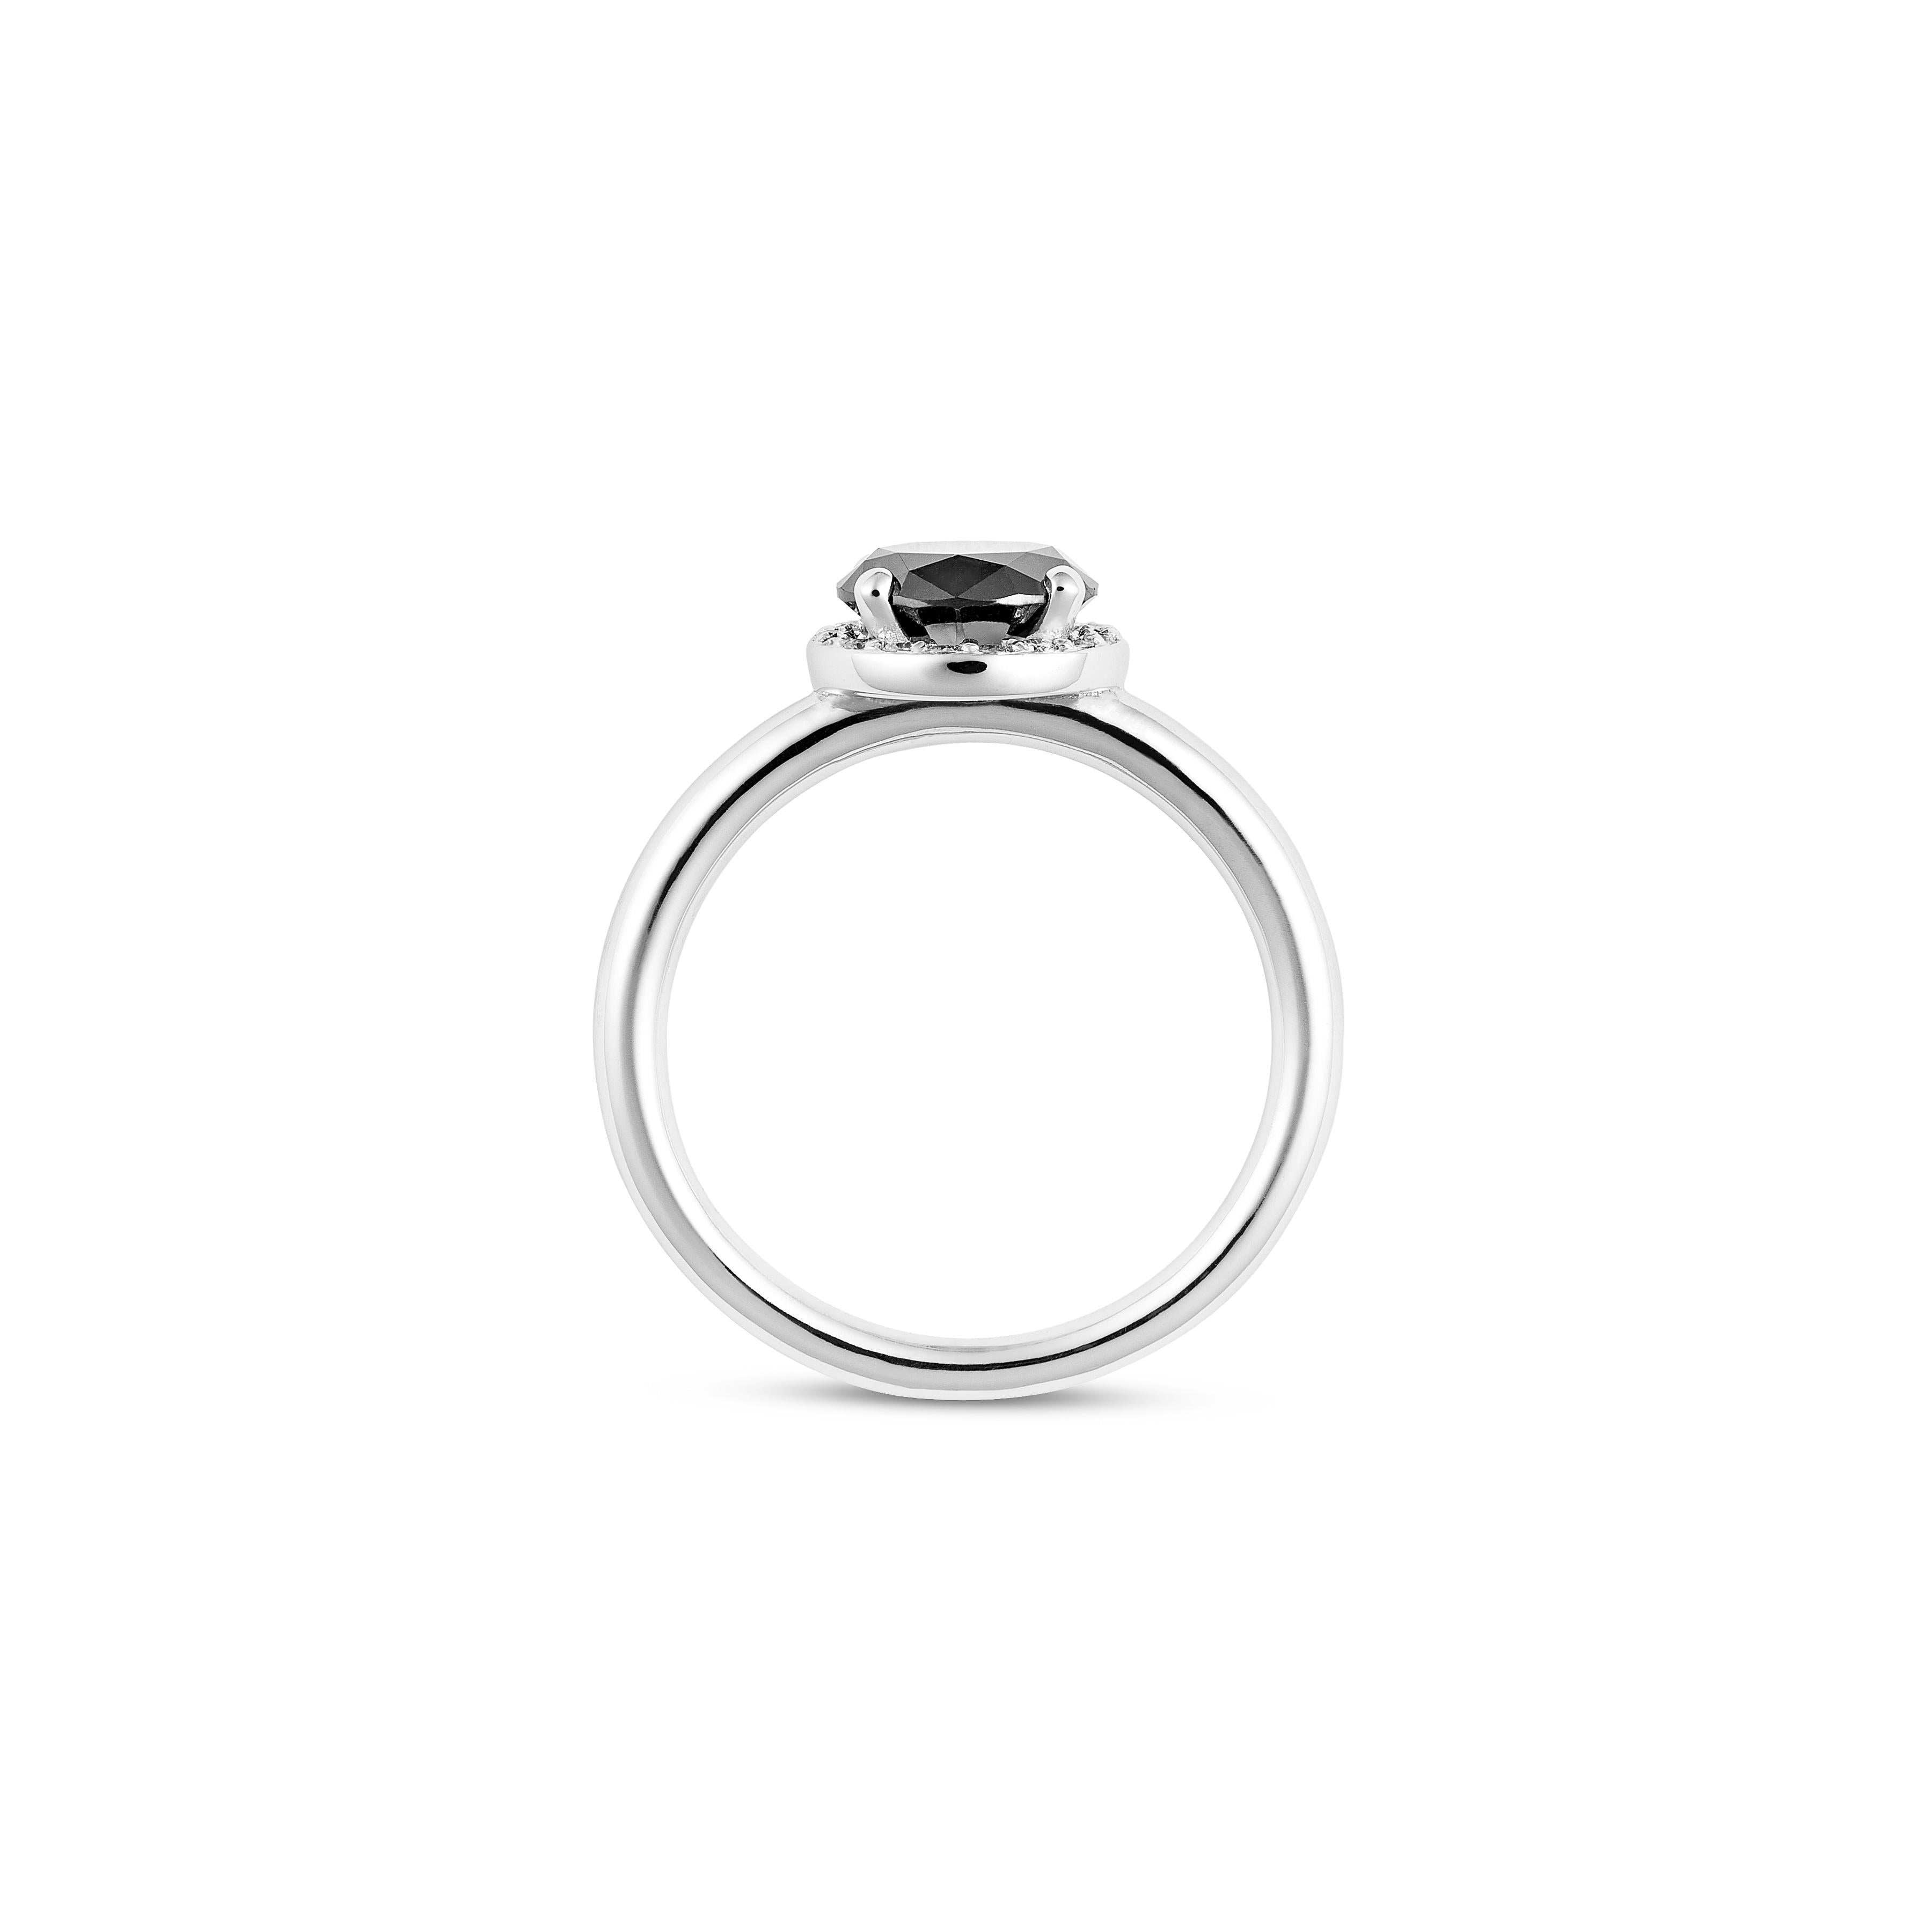 Handcrafted in 18ct white gold this black and white diamond engagement ring is an enigmatic natural-colour black diamond. Revered for its unique and dramatic beauty designed in a fine halo setting circled by collection quality micro-pave set round